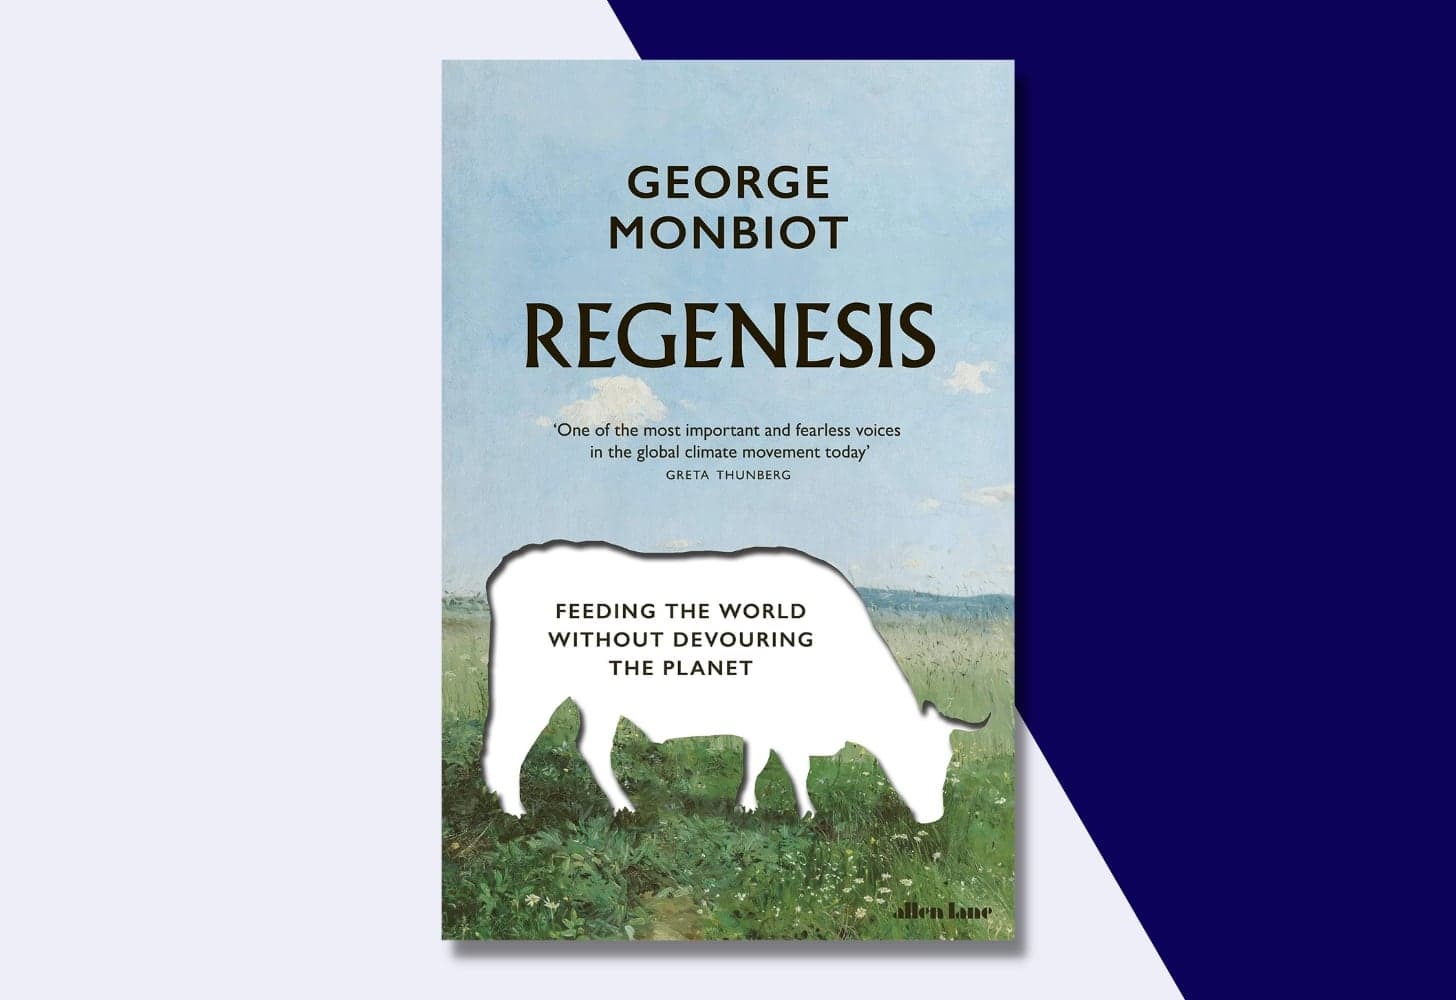 “Regenesis: Feeding the World Without Devouring the Planet” by George Monbiot